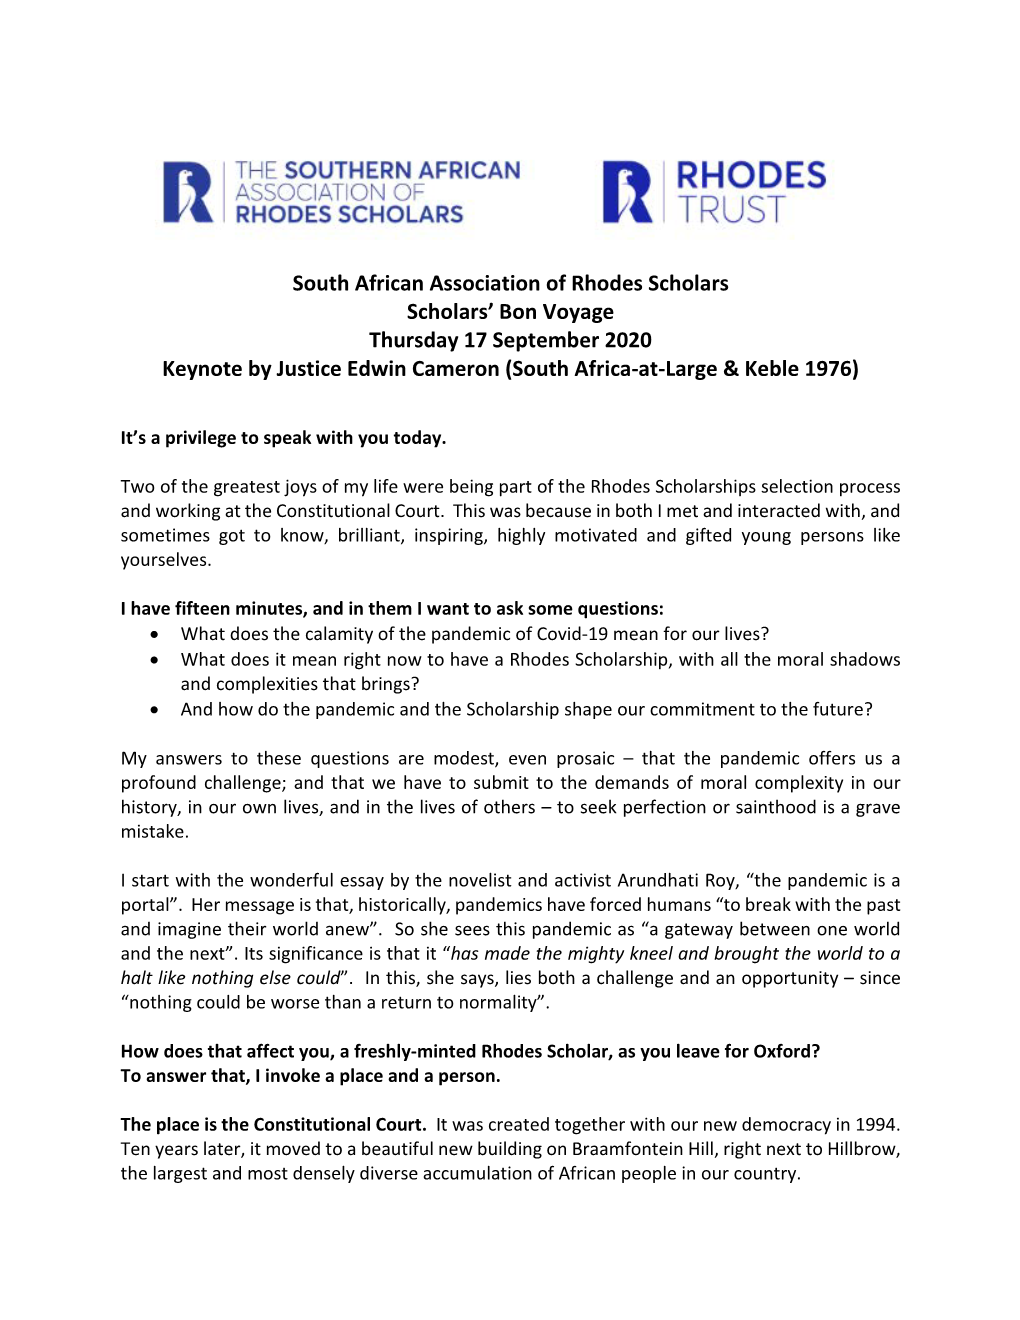 South African Association of Rhodes Scholars Scholars' Bon Voyage Thursday 17 September 2020 Keynote by Justice Edwin Cameron